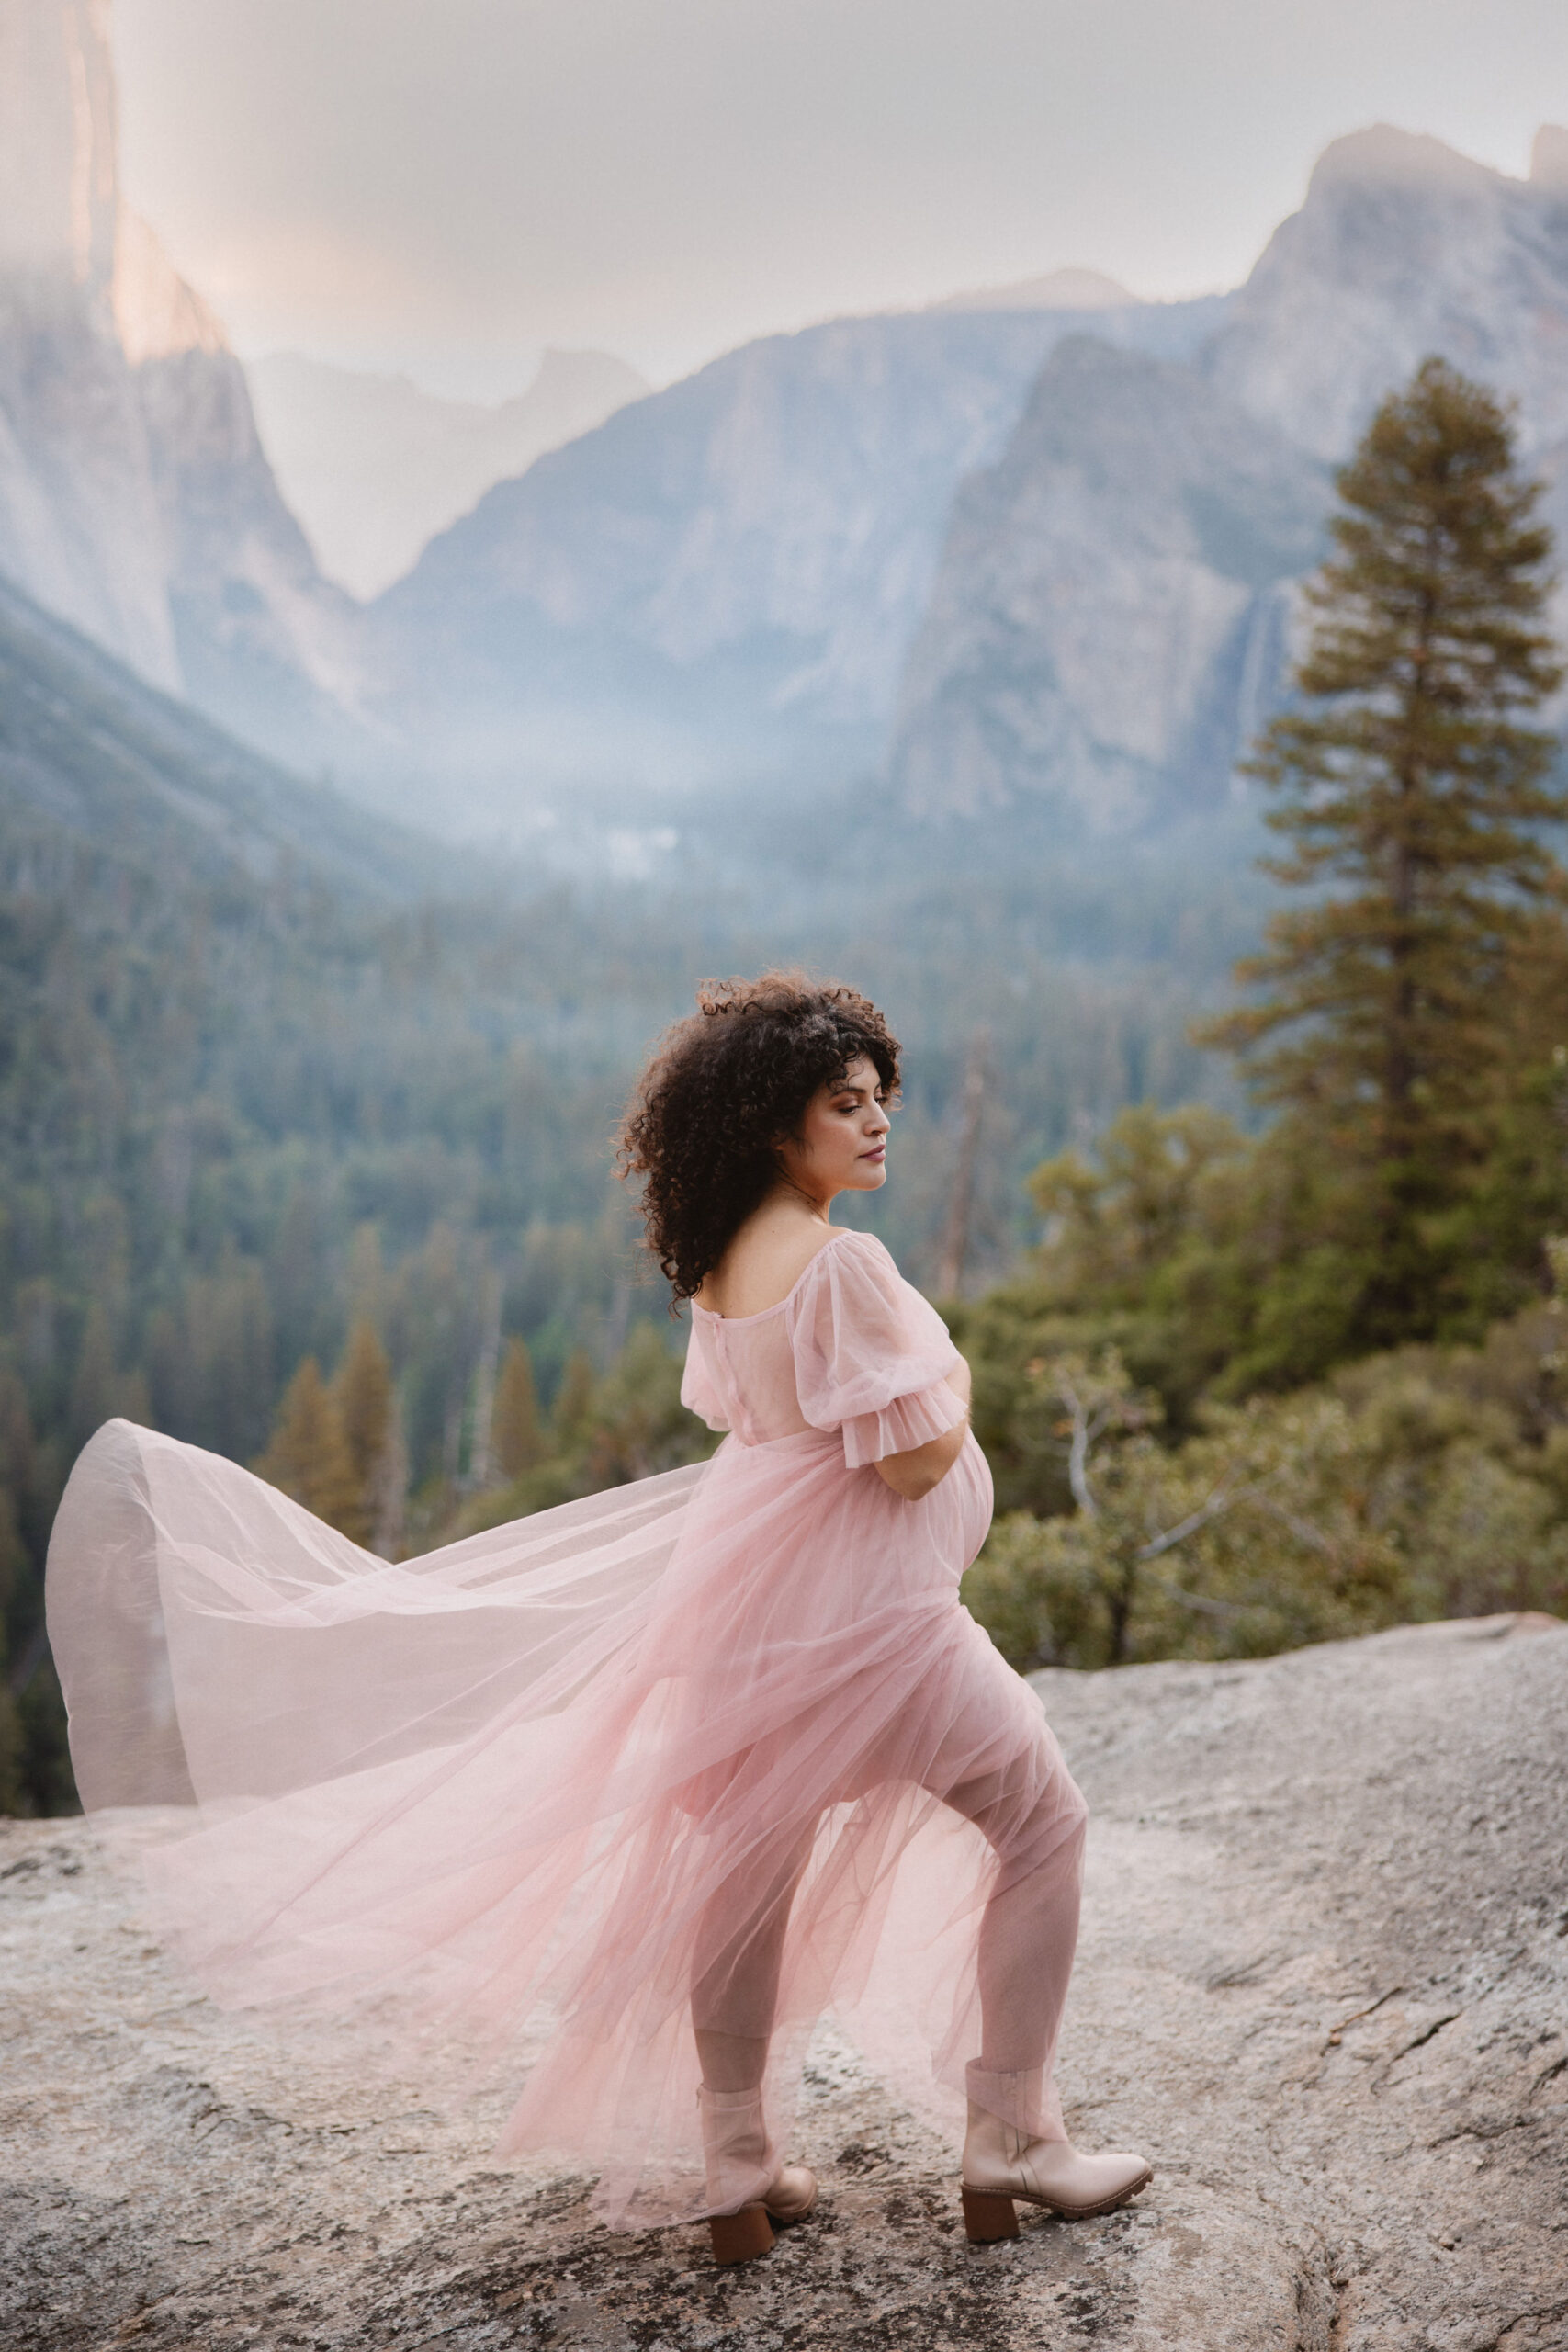 Pregnant woman in a pink dress standing on a rocky terrain with a scenic forest and mountain backdrop during sunset at her 